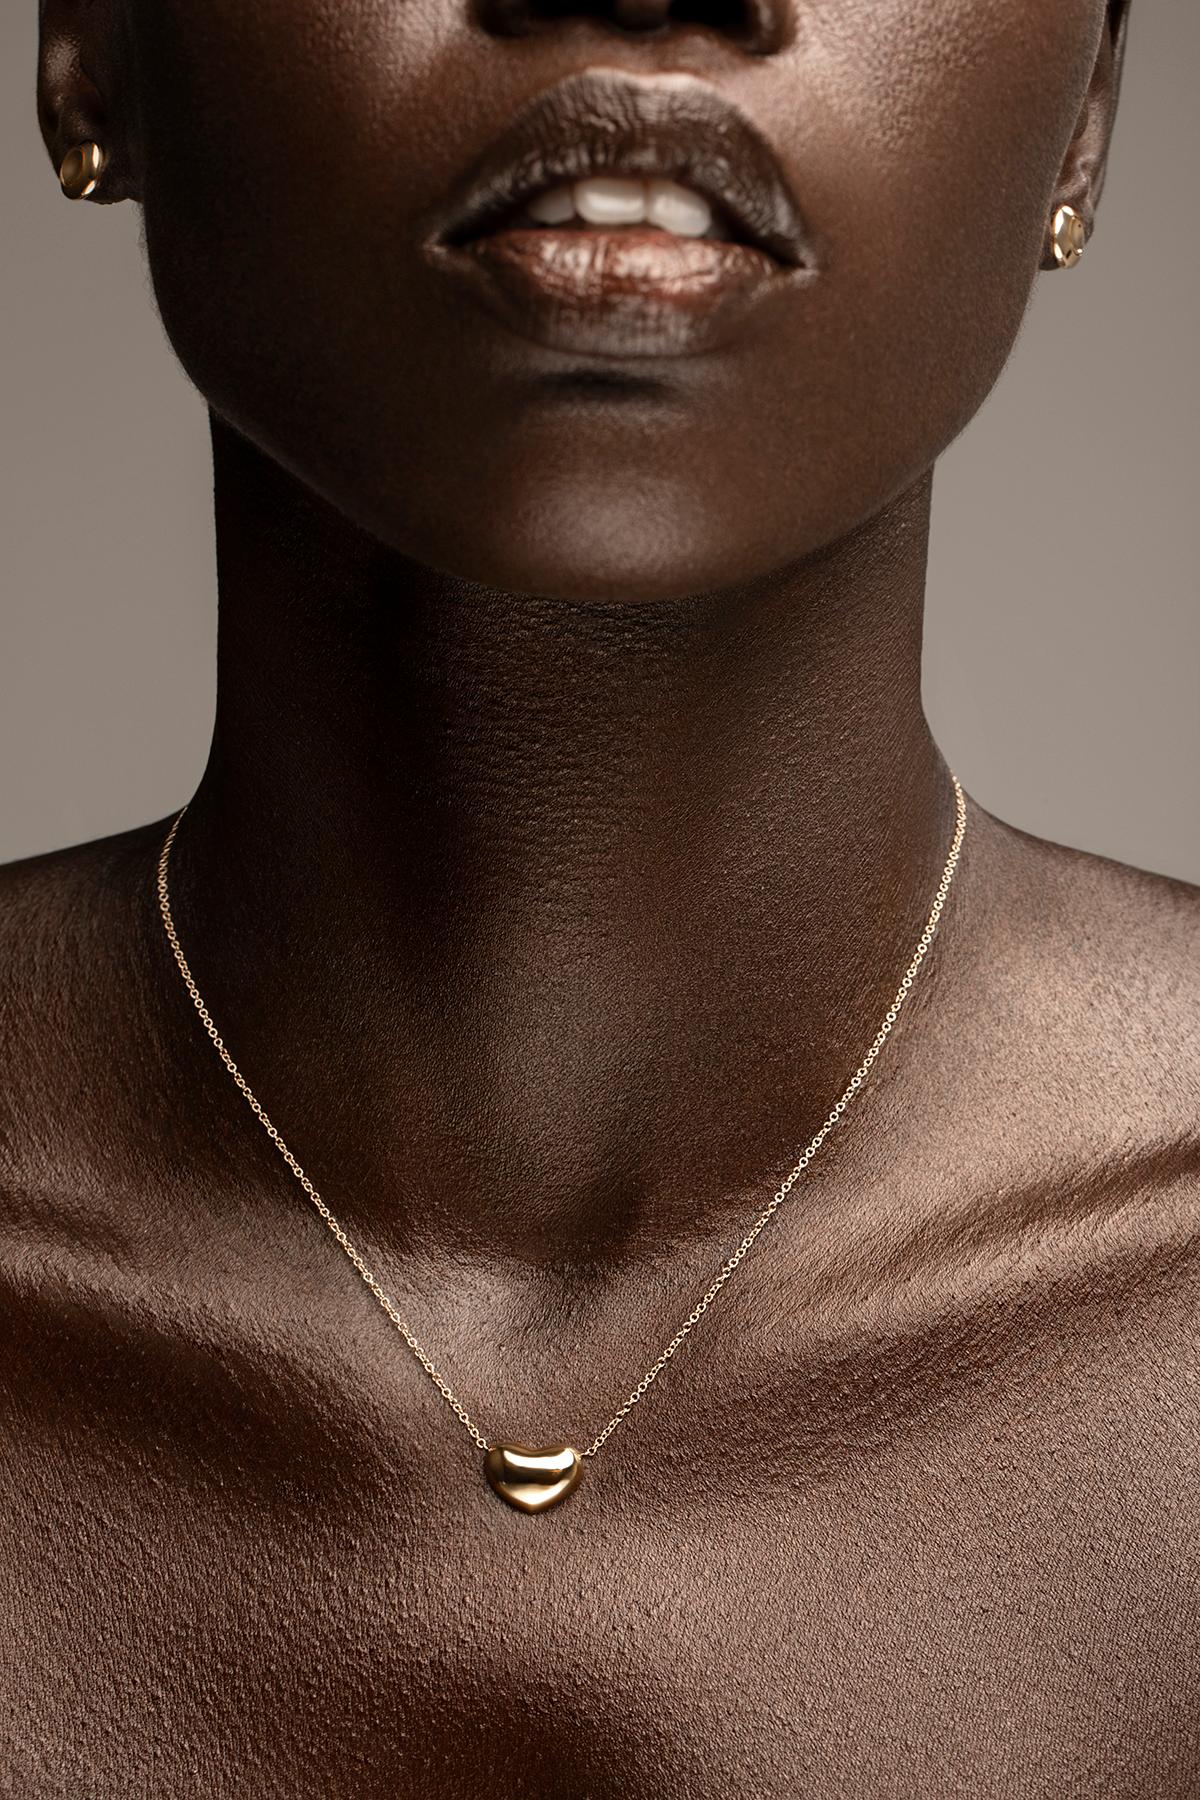 Our Heart necklace meant to be worn and cherished forever.

Handcrafted in NYC with 18kt certified Fairmined Ecological gold that is toxic chemical free, sustainable, ethical and clean. Chain is 16